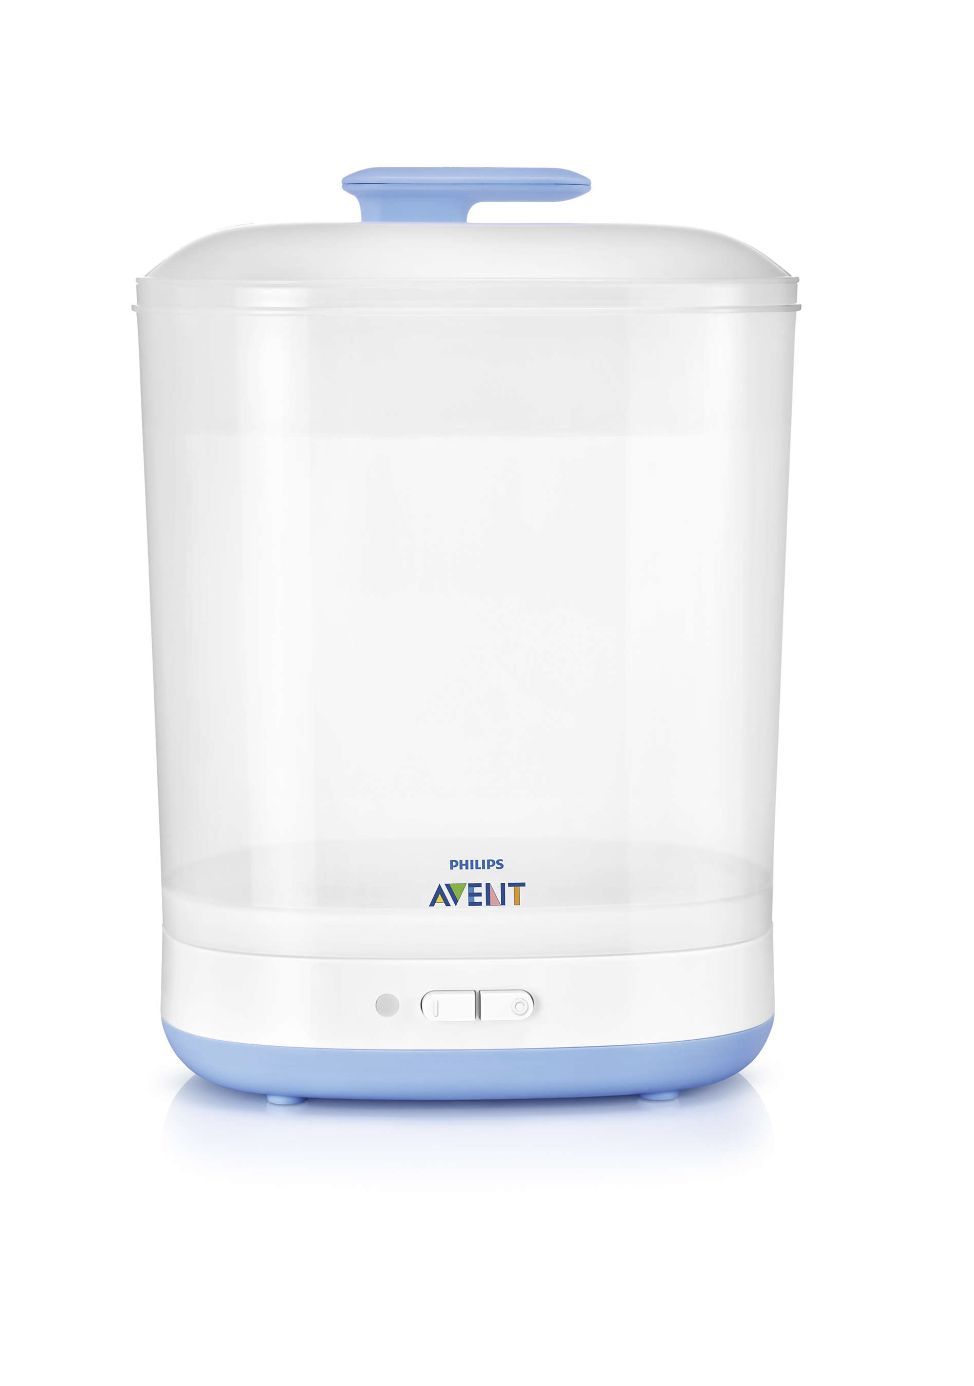 Philips 2 in 1 steam фото 63